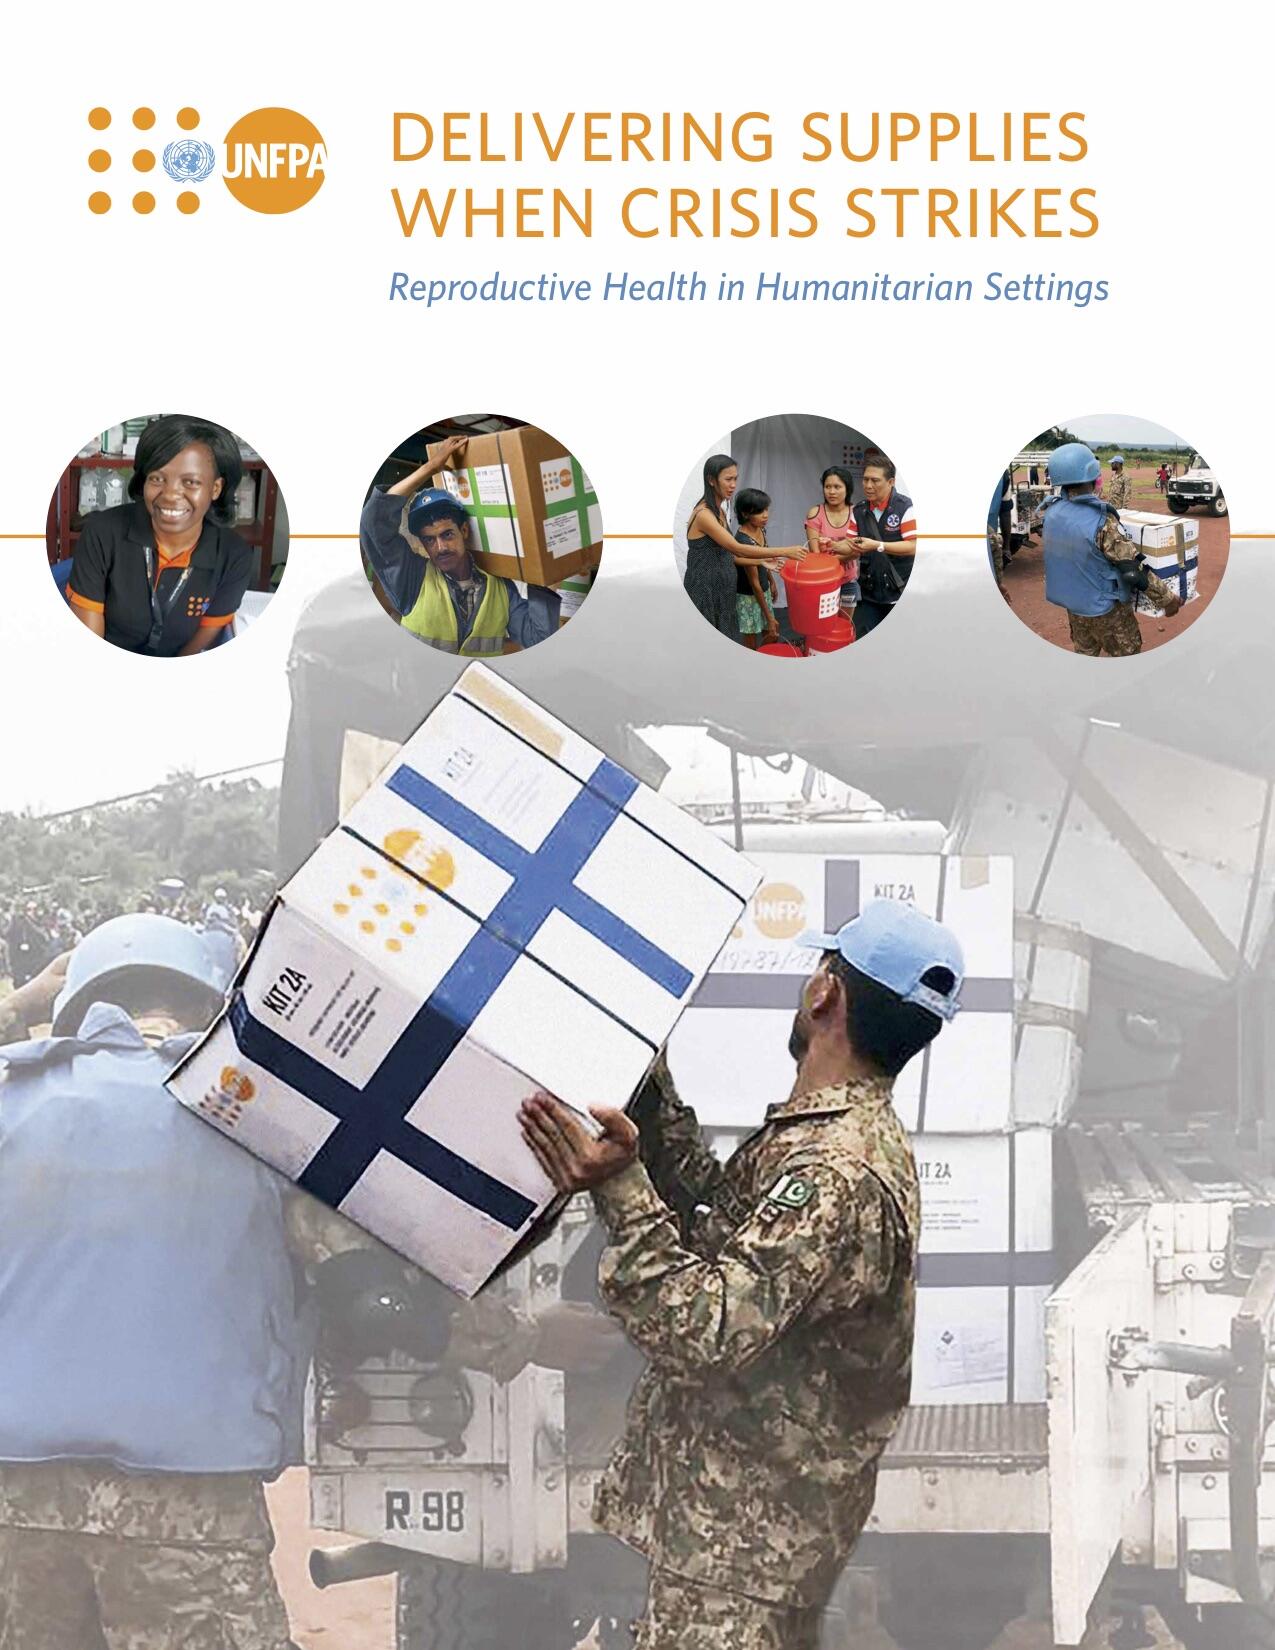 The cover of the report shows humanitarian aid works providing supplies to affected communities